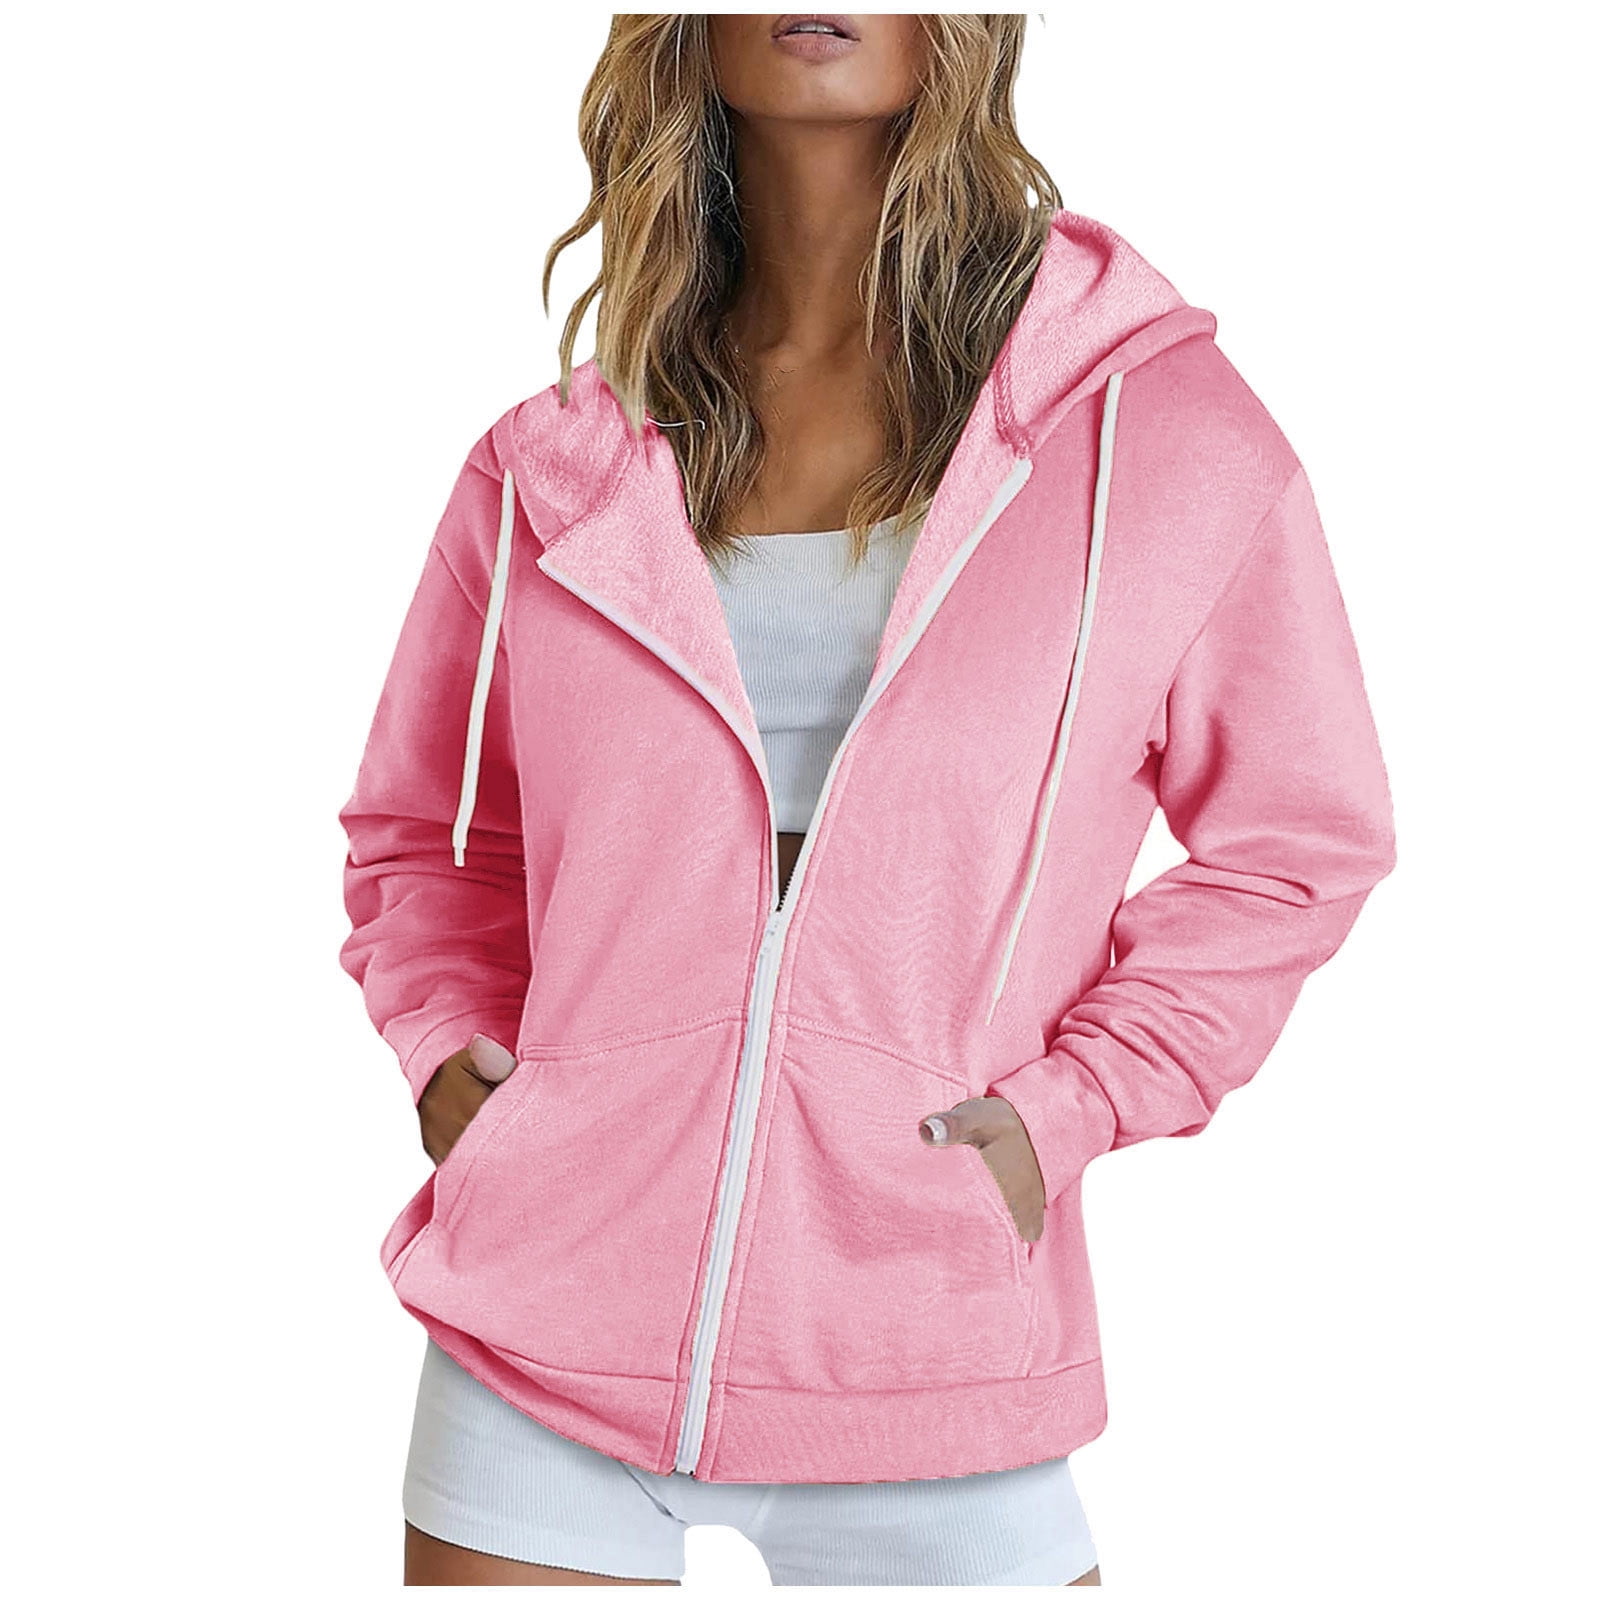 Full Zip-up Jackets with Pockets for Women Cotton Fleece Plain